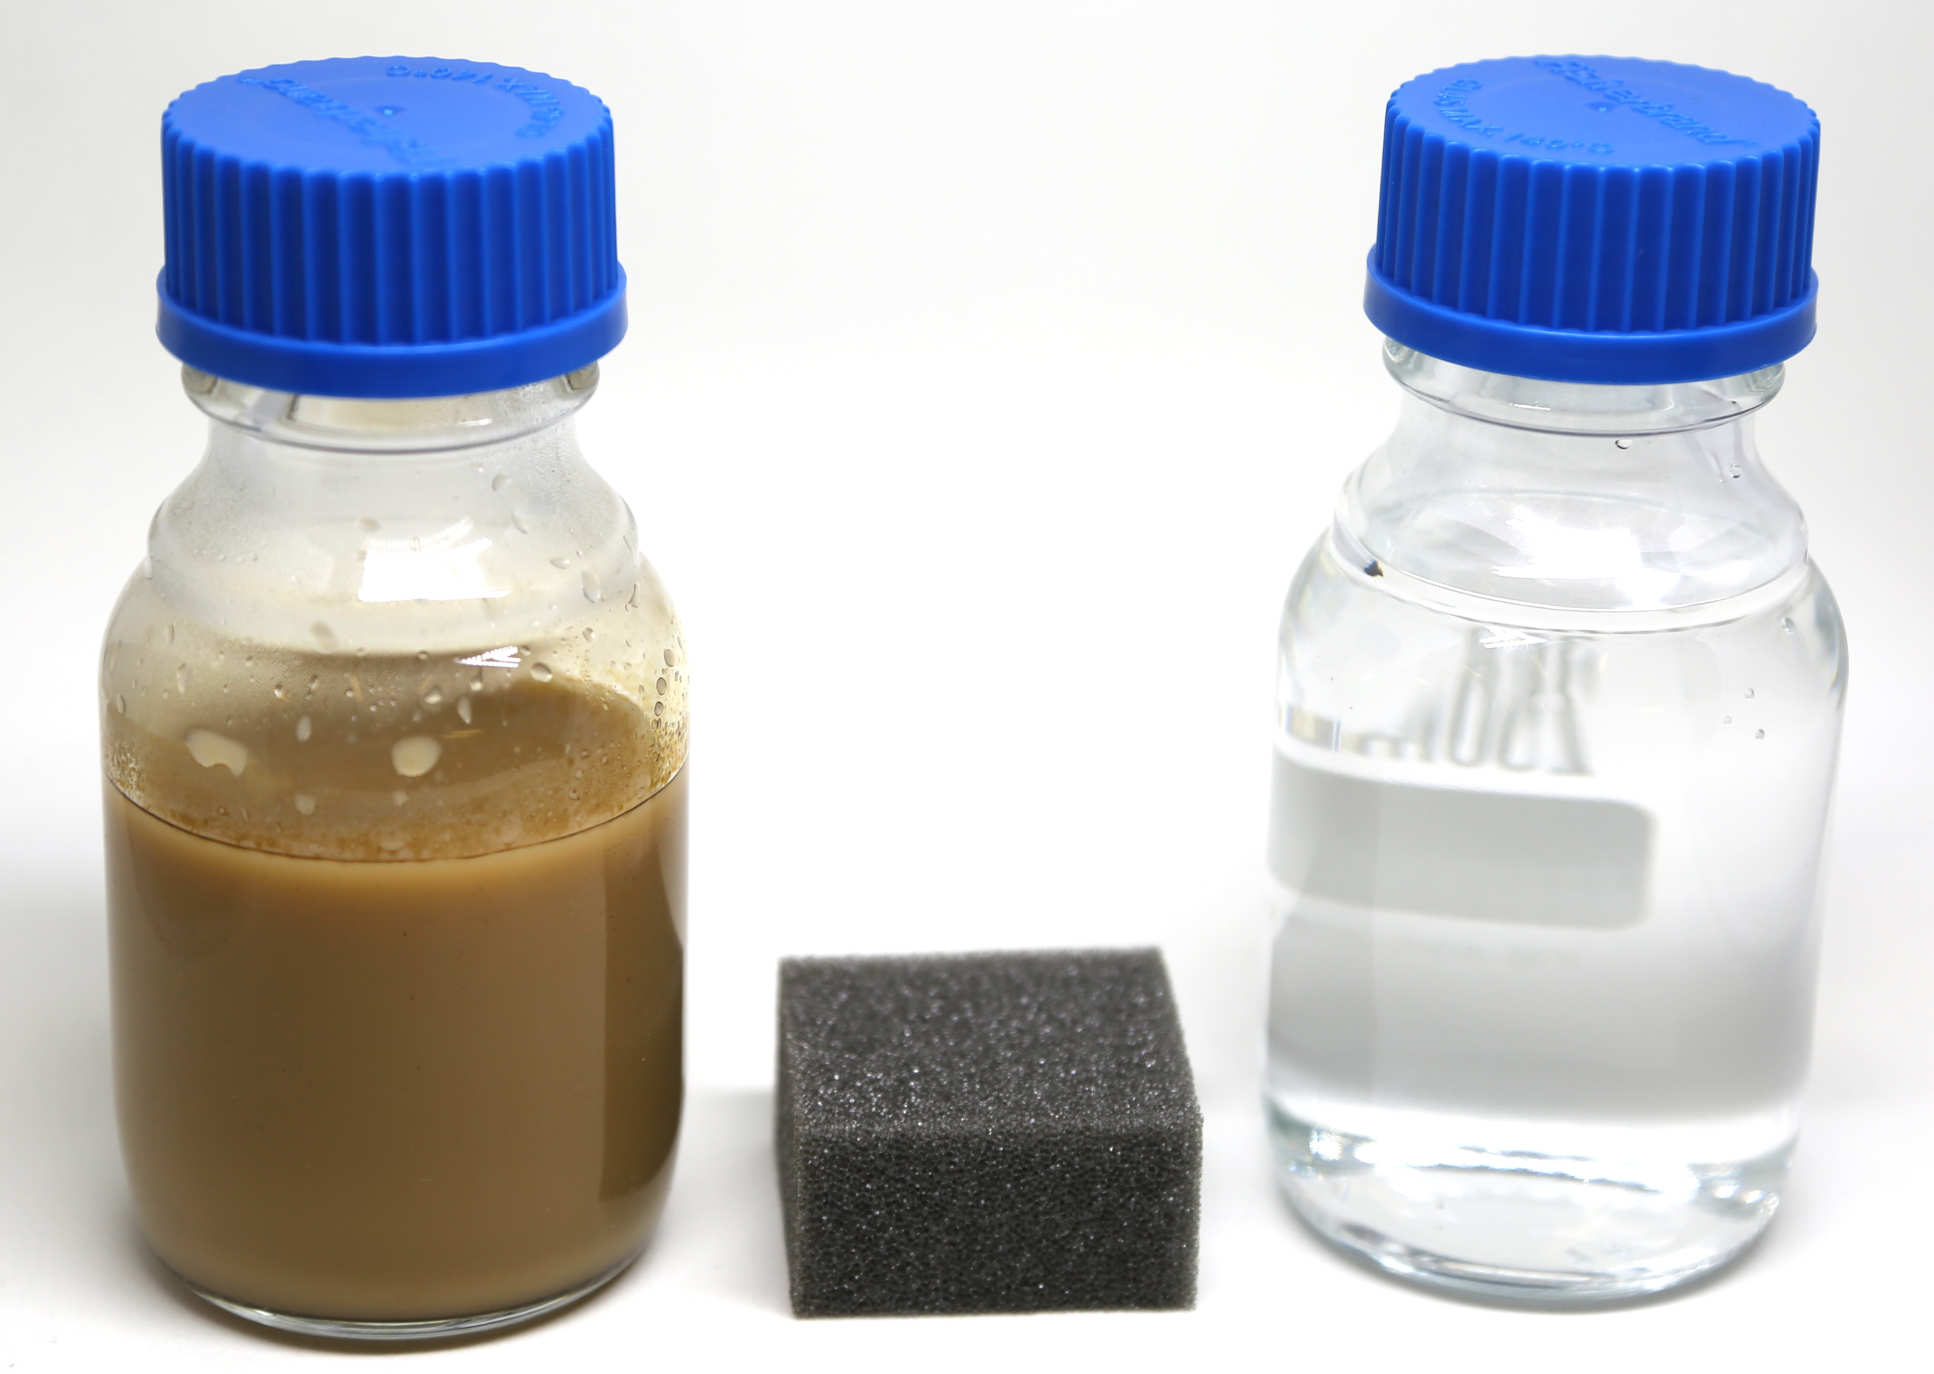 Photo of two bottles - one containing brown liquid, the other containing clear liquid. Between the bottles is a small black sponge.